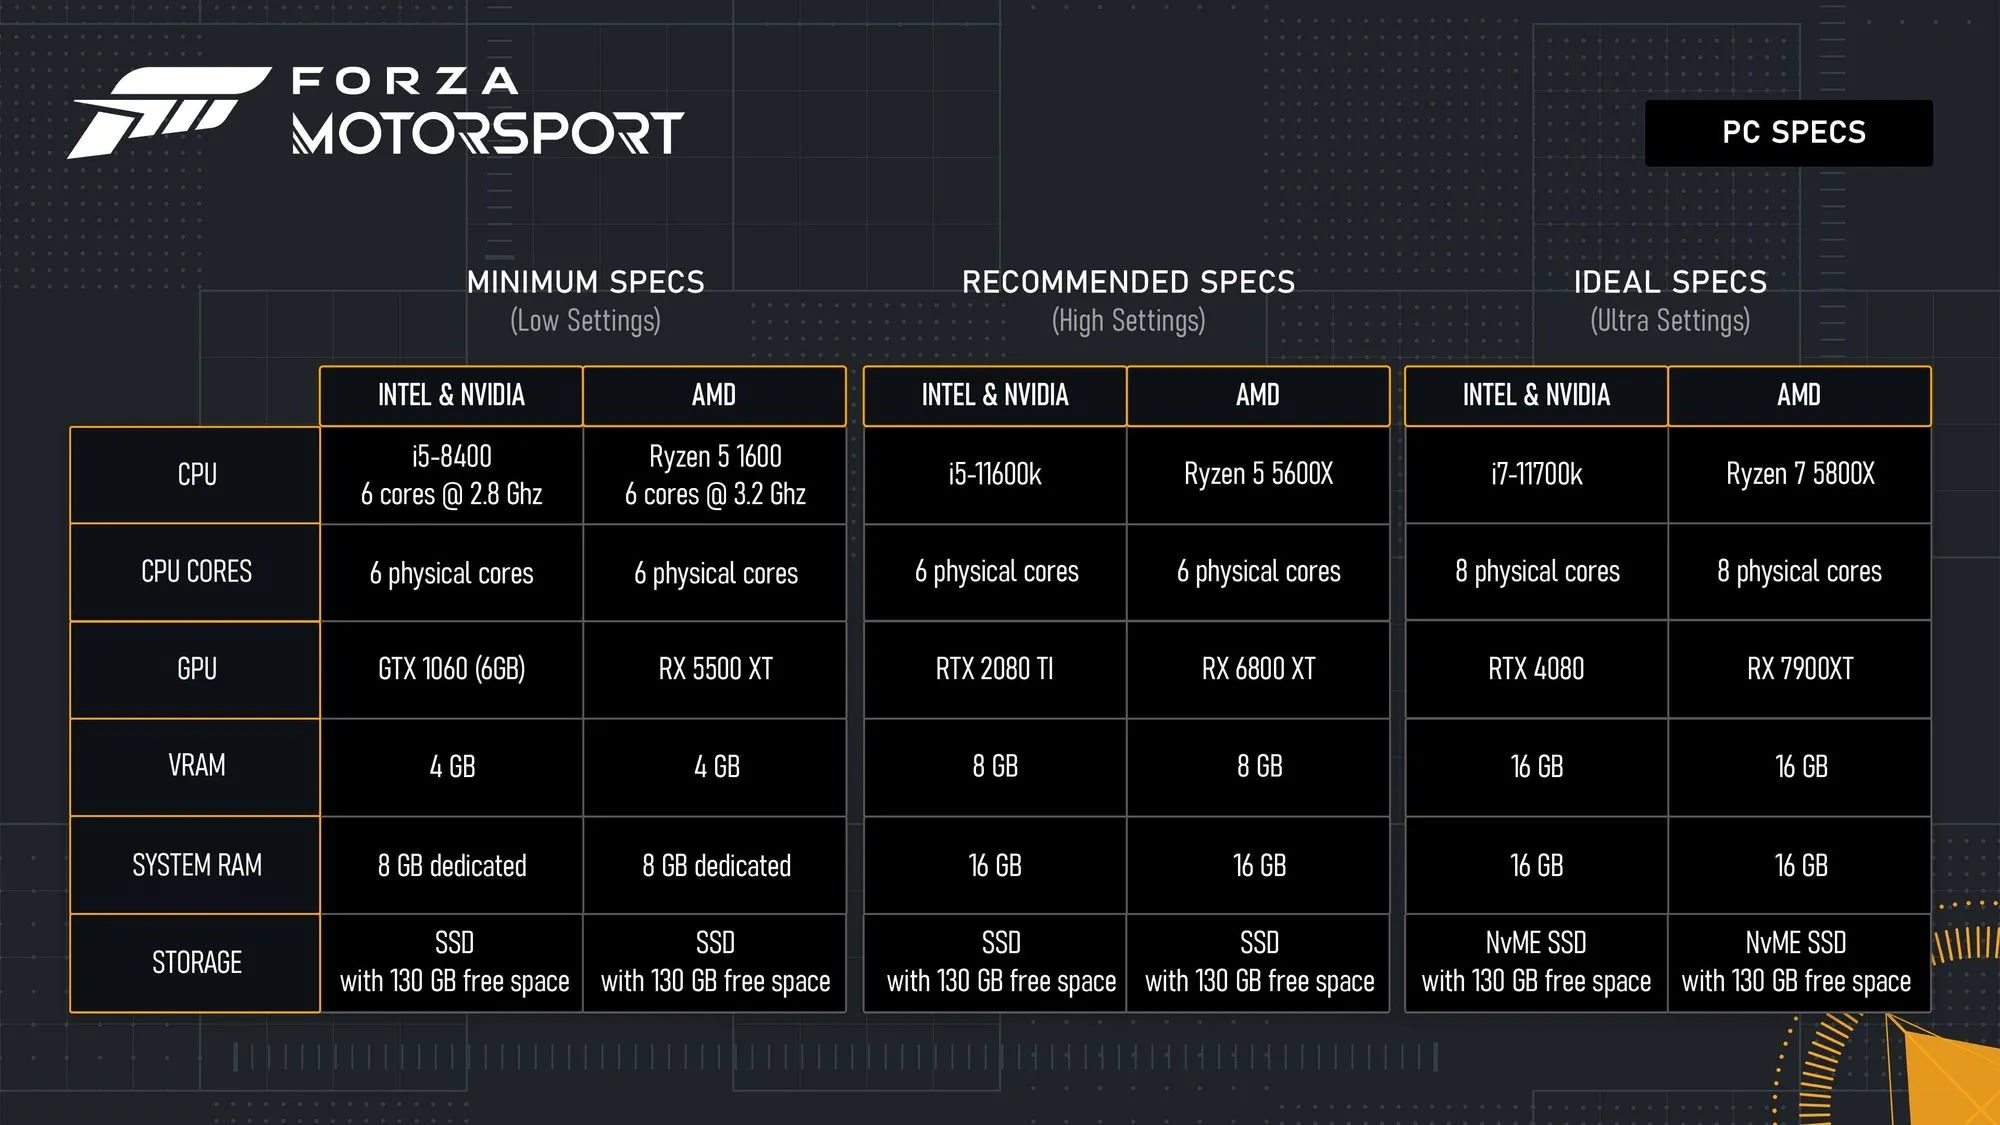 forza motorsport pc requirements  Image of forza motorsport pc requirements